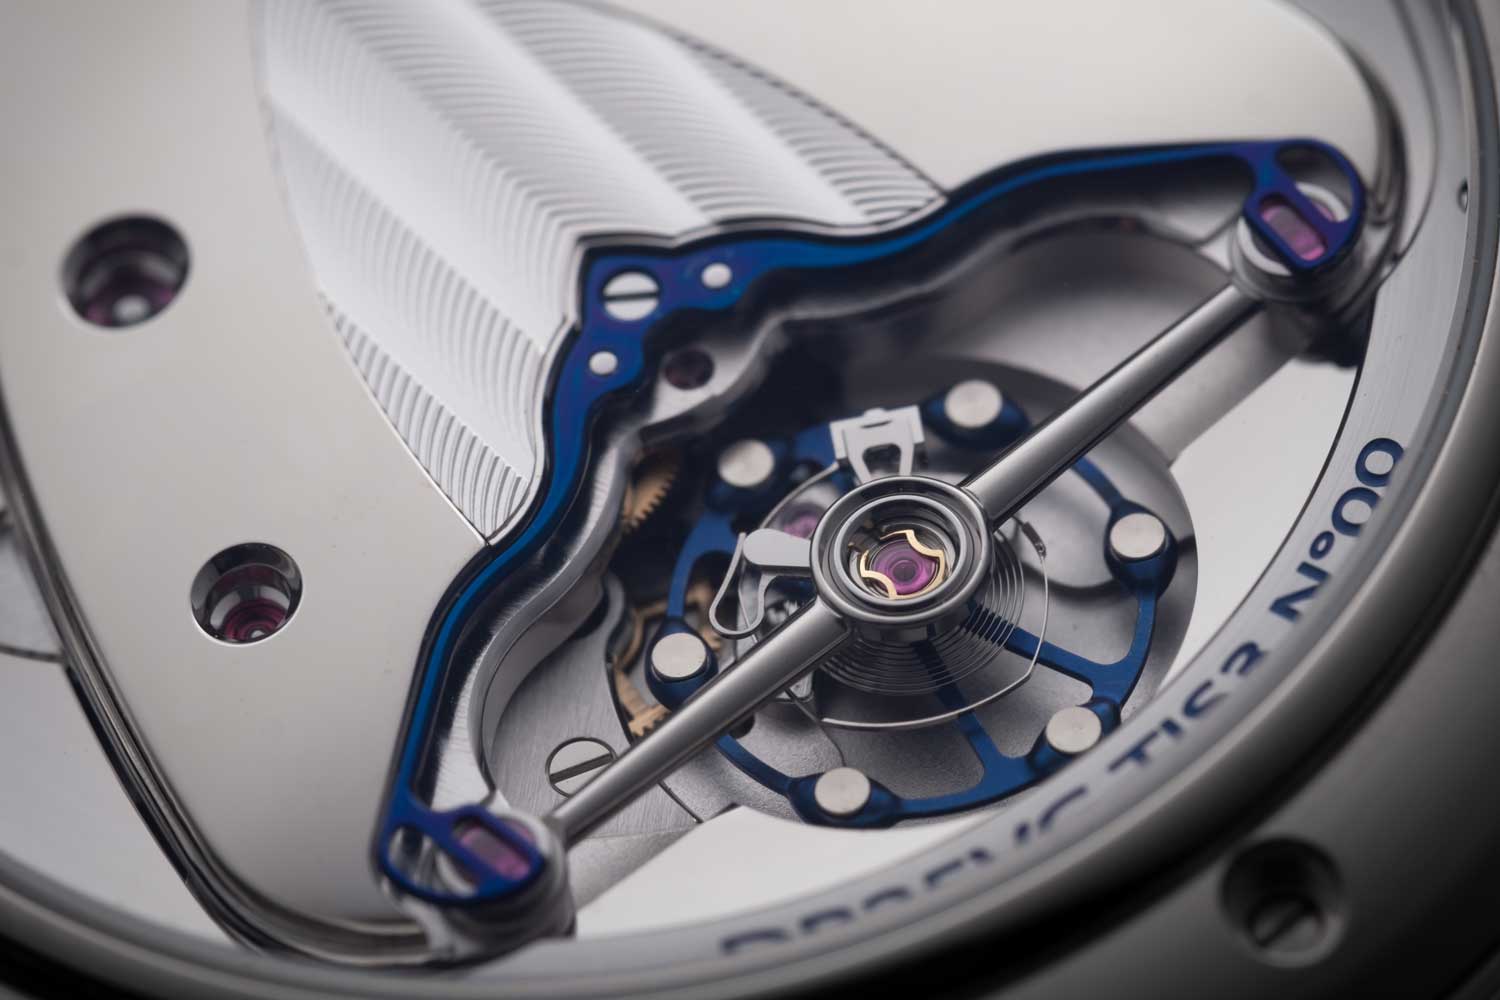 The reverse side of the movement reveals the latest titanium balance with white gold inlays